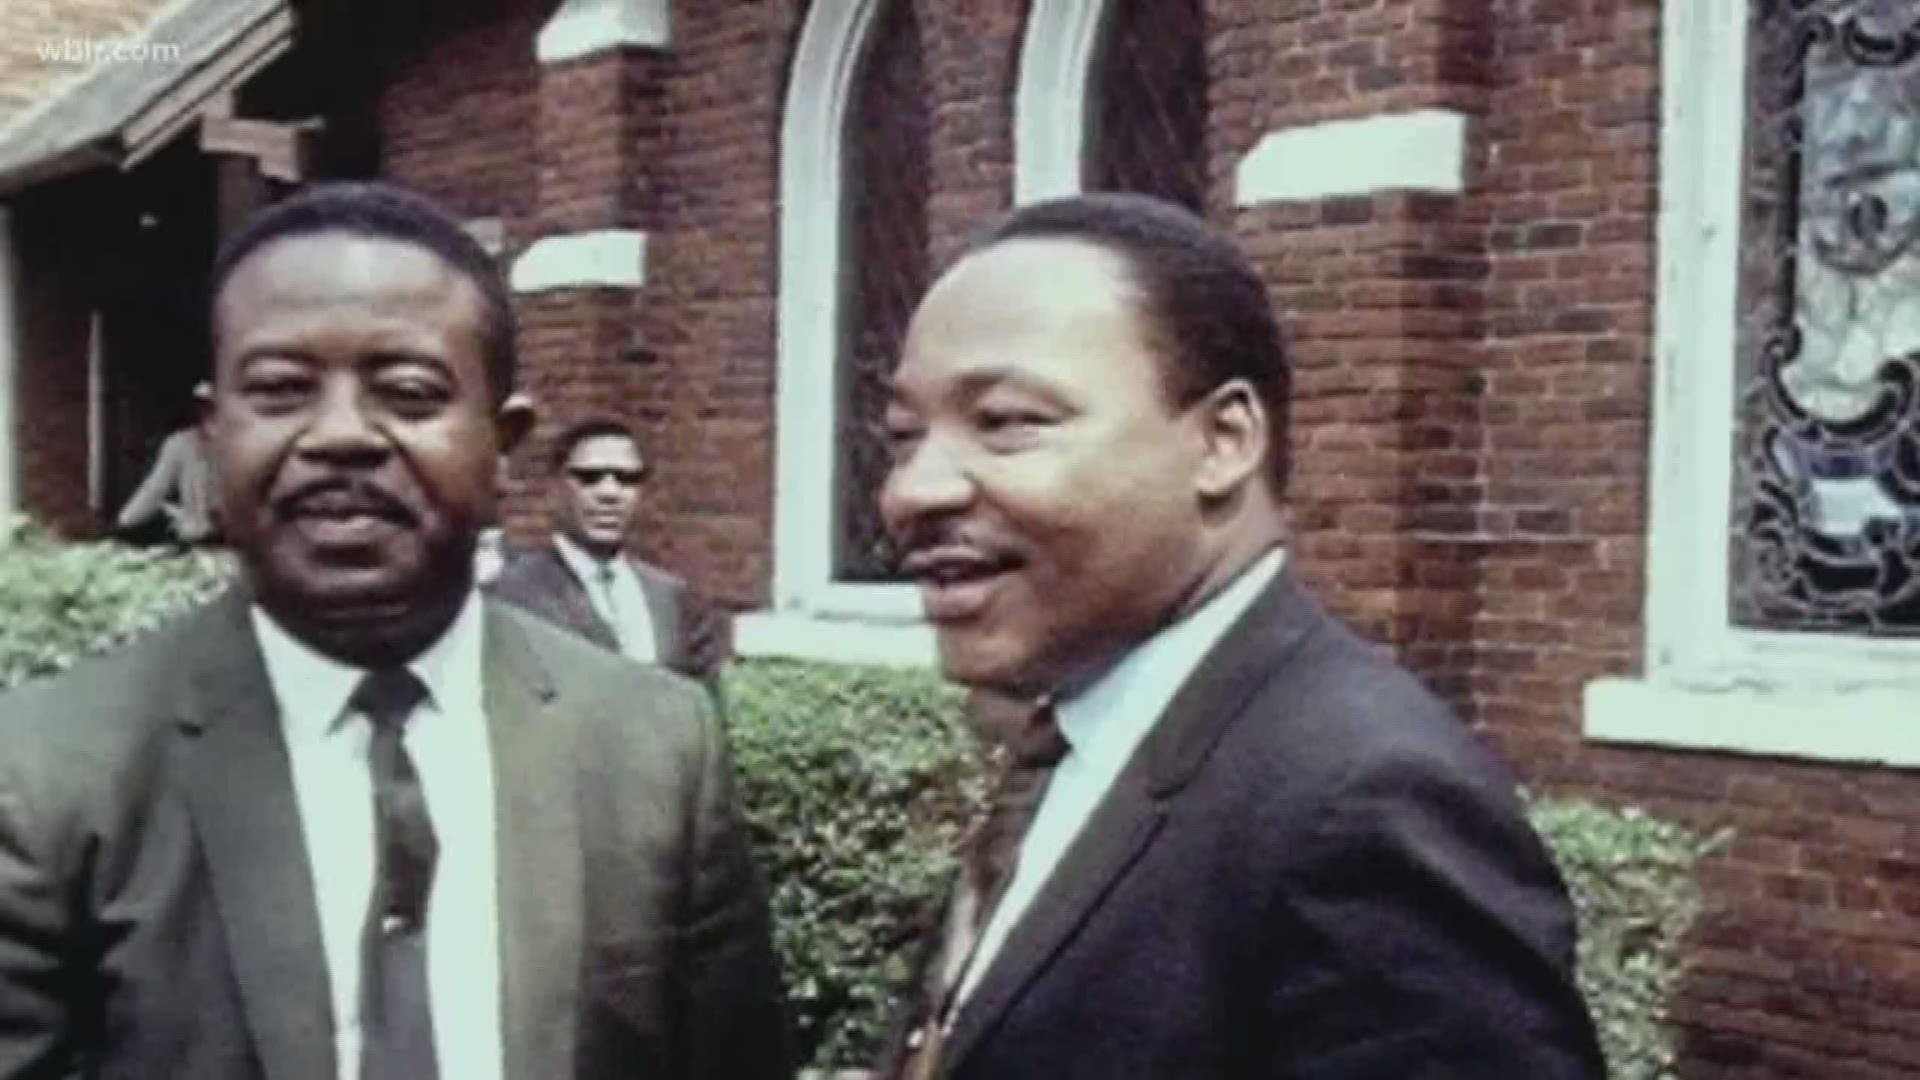 On the fiftieth Anniversary of one of his most iconic speeches, a local church is honoring the memory of slain Civil Rights leader, Dr. Martin Luther King, Jr. called The Mountaintop Experience.April 3, 2018-4pm